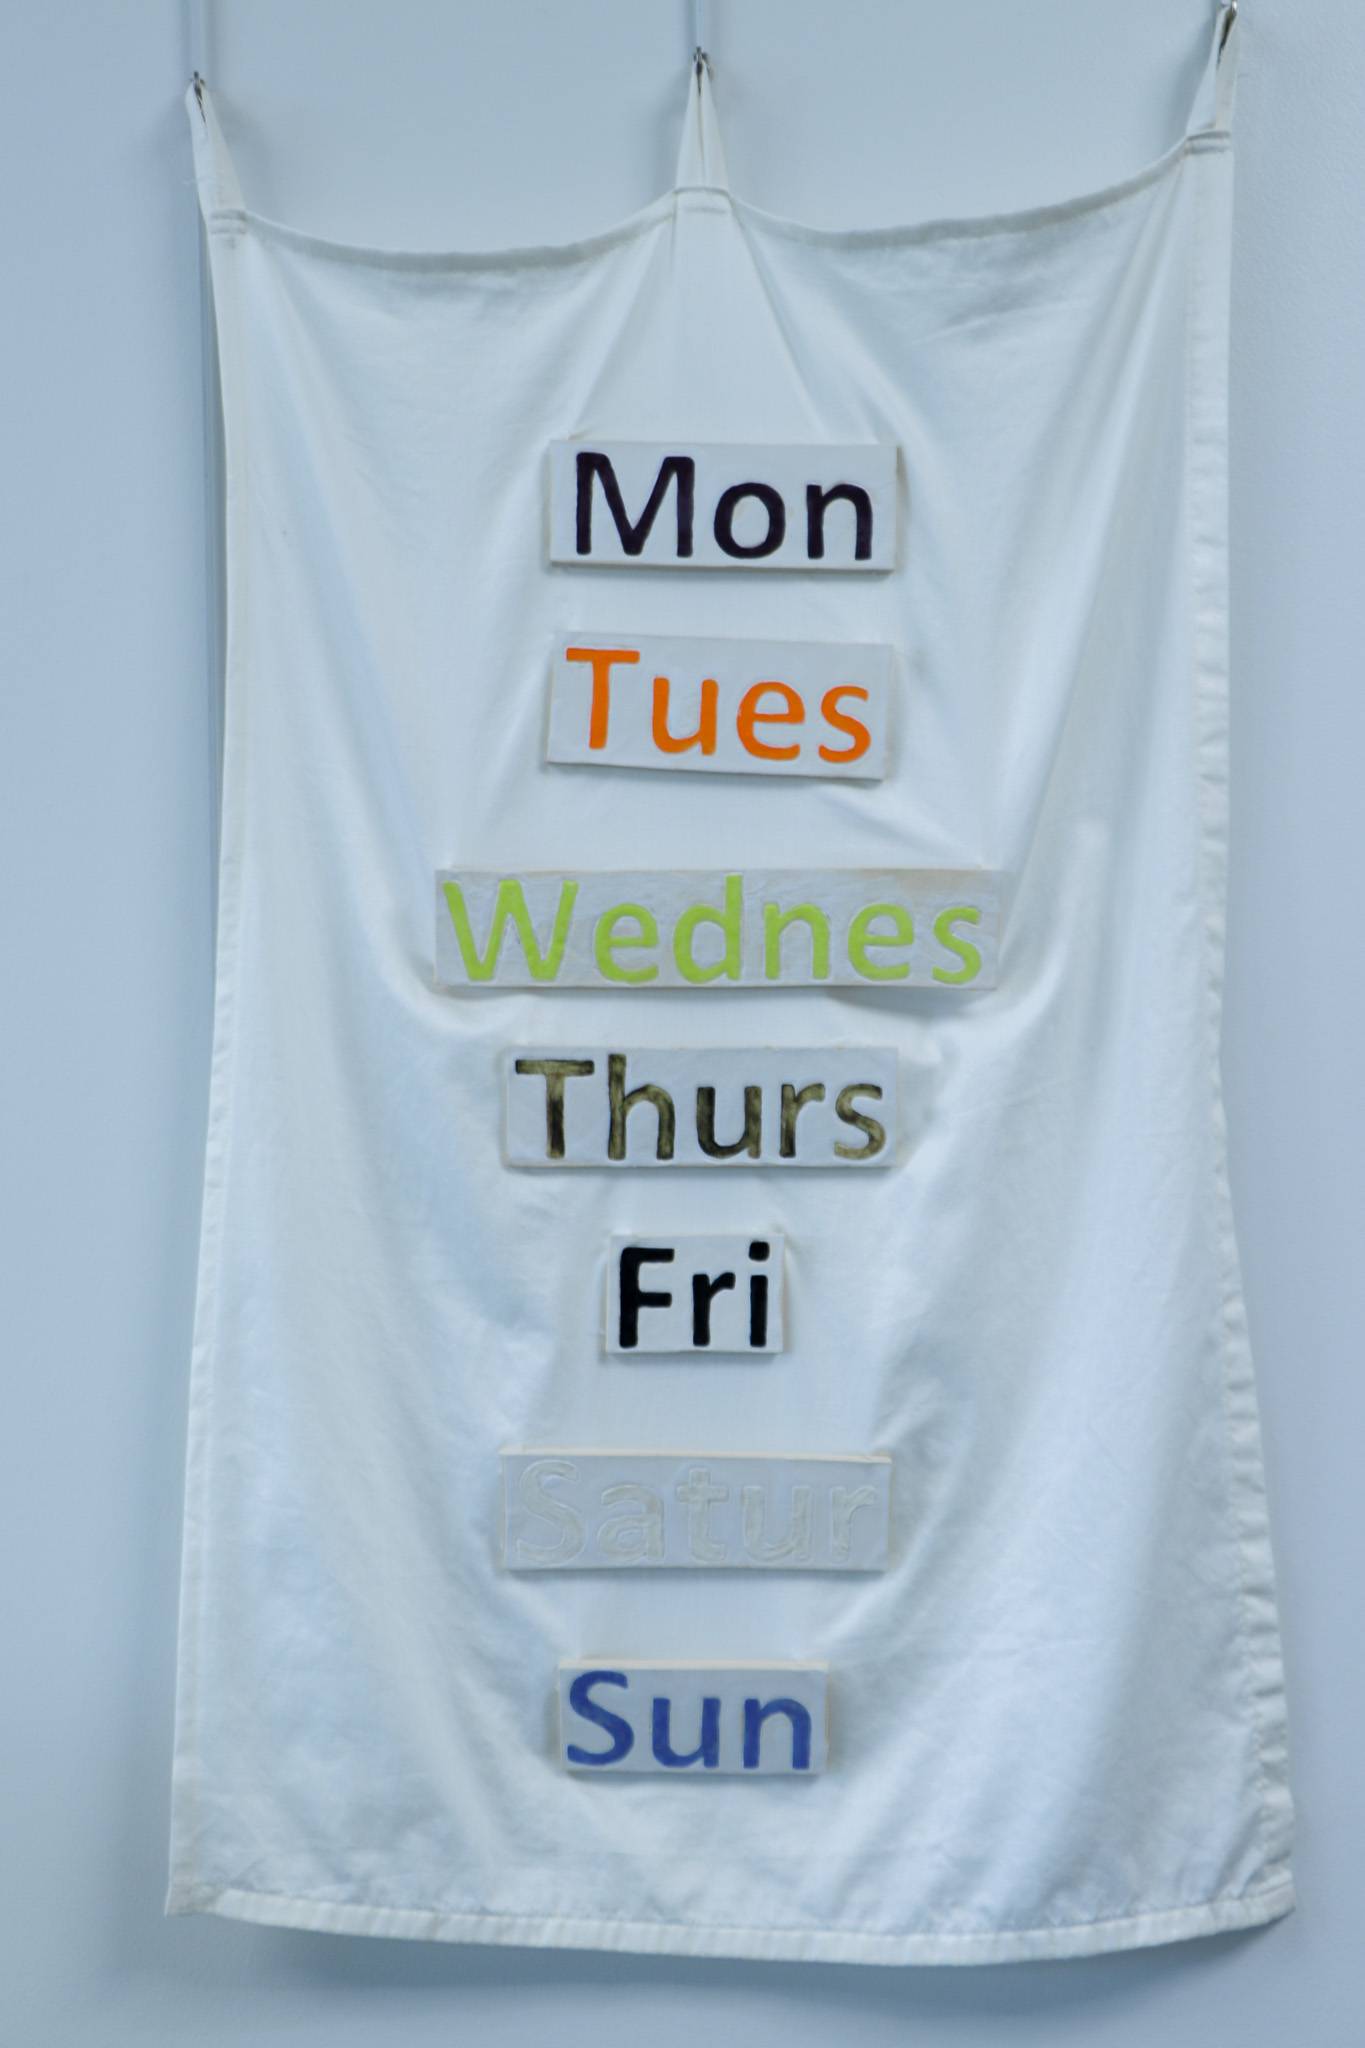 A list of the days of the week